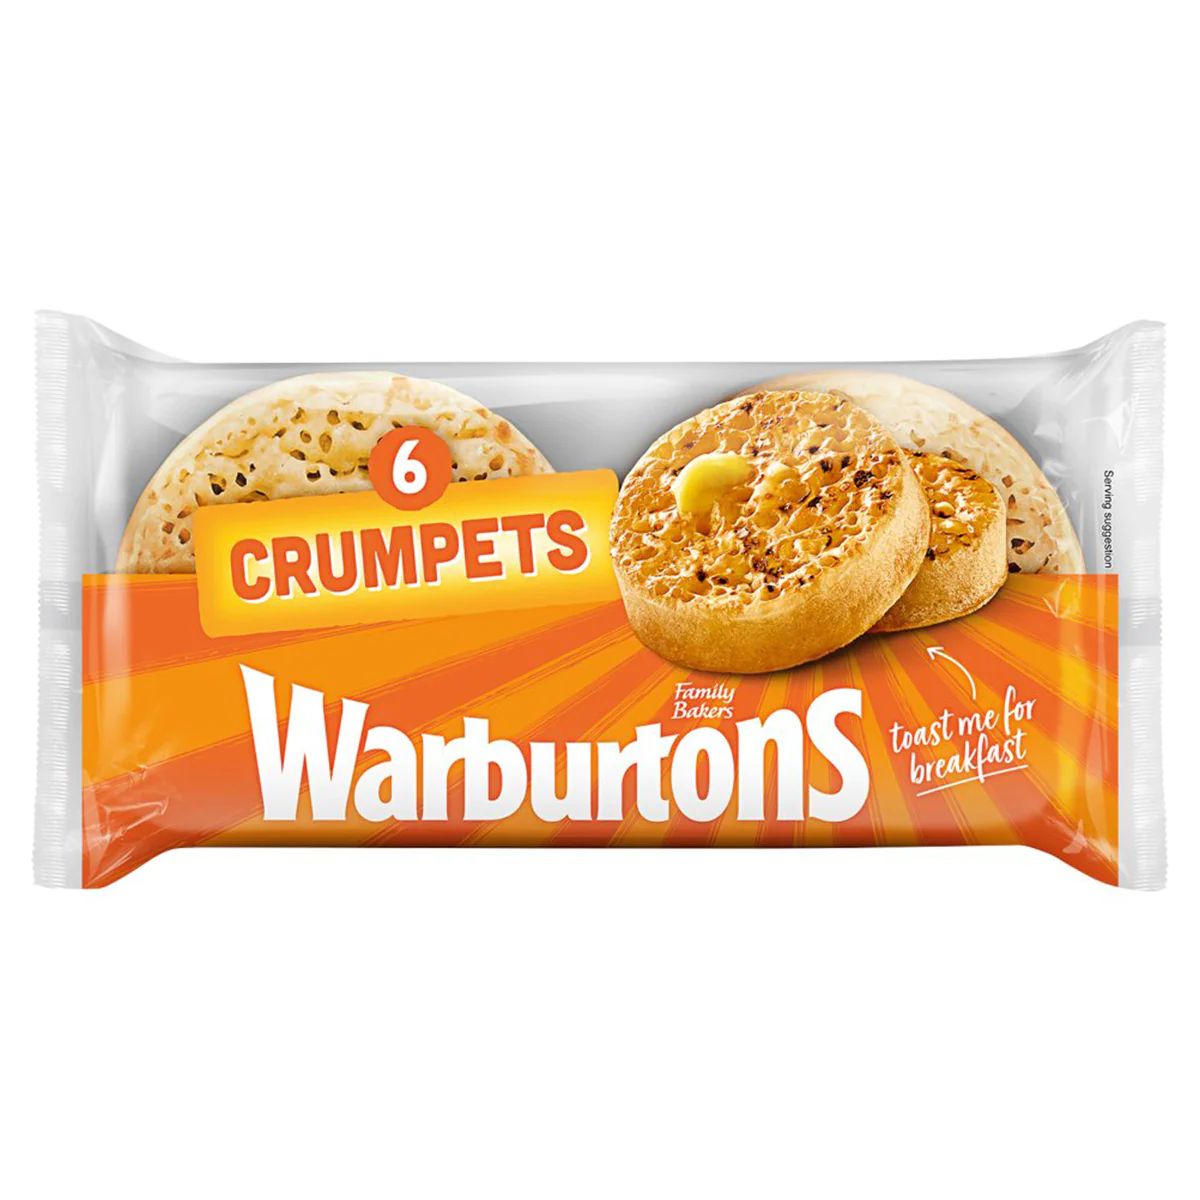 Pack of Wartburtons - Crumpets - 6 Pack in plastic wrapping.